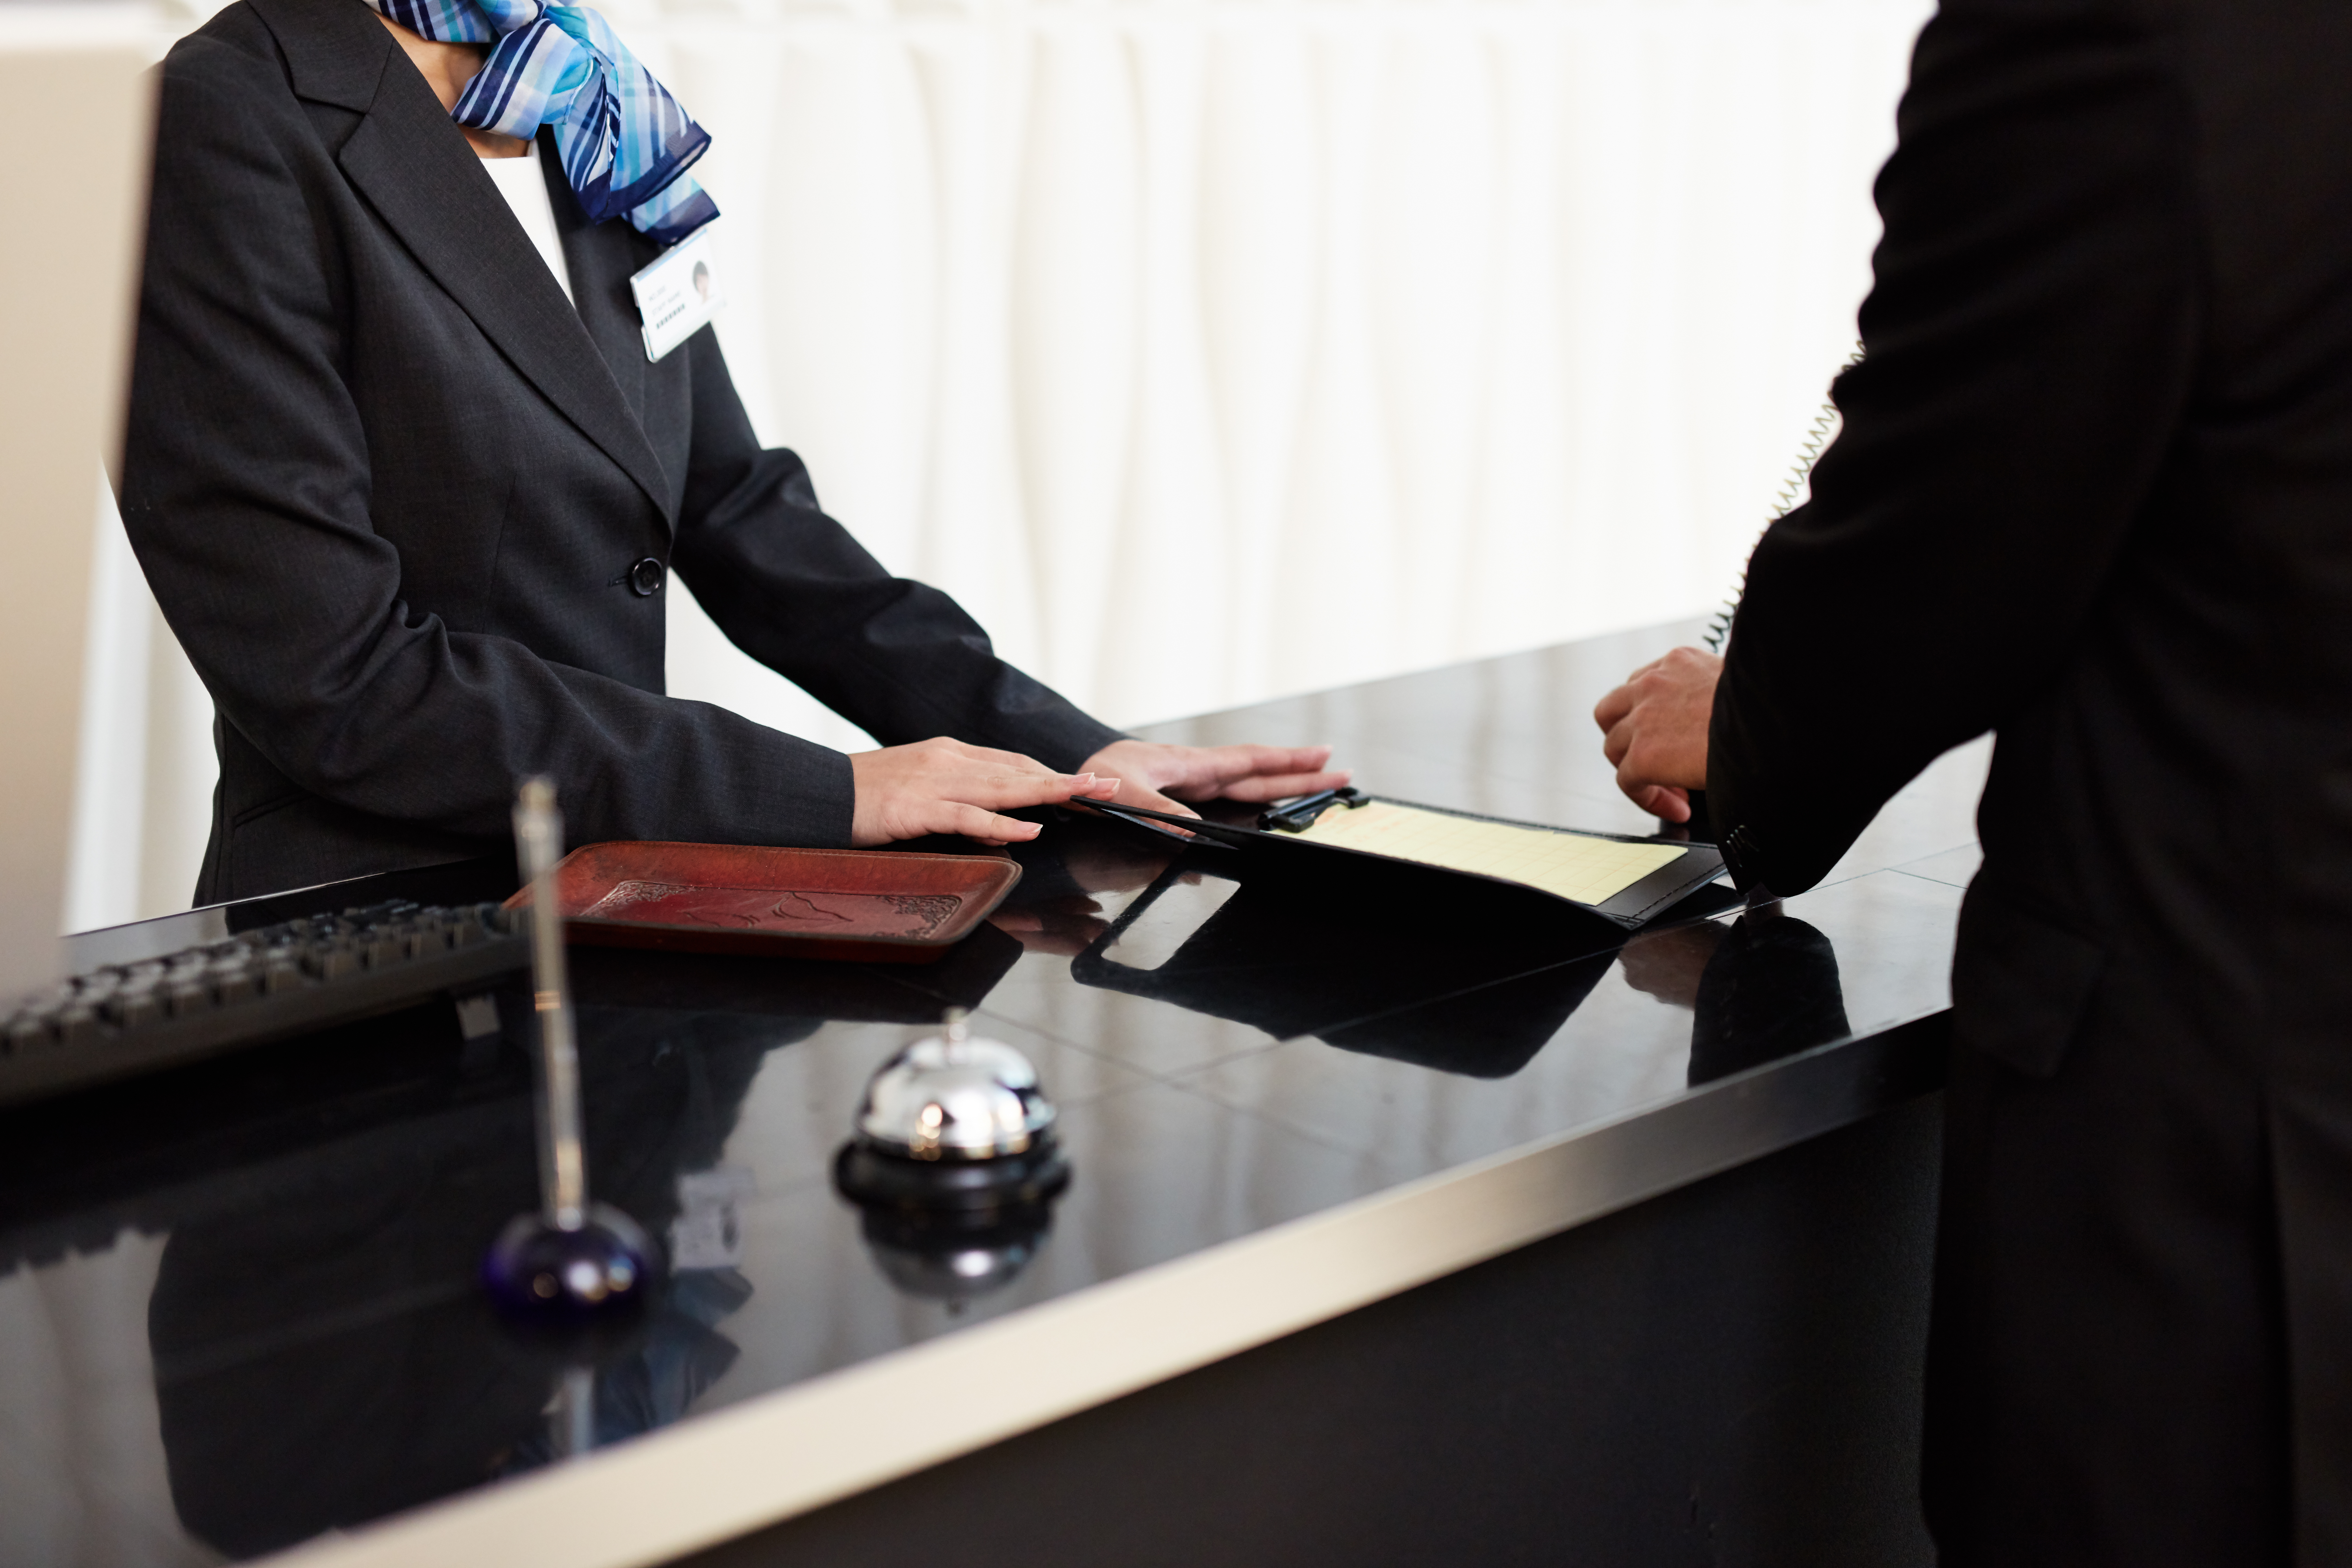 Hotel Front Desk Secrets 9 Ways To Improve Your Stay